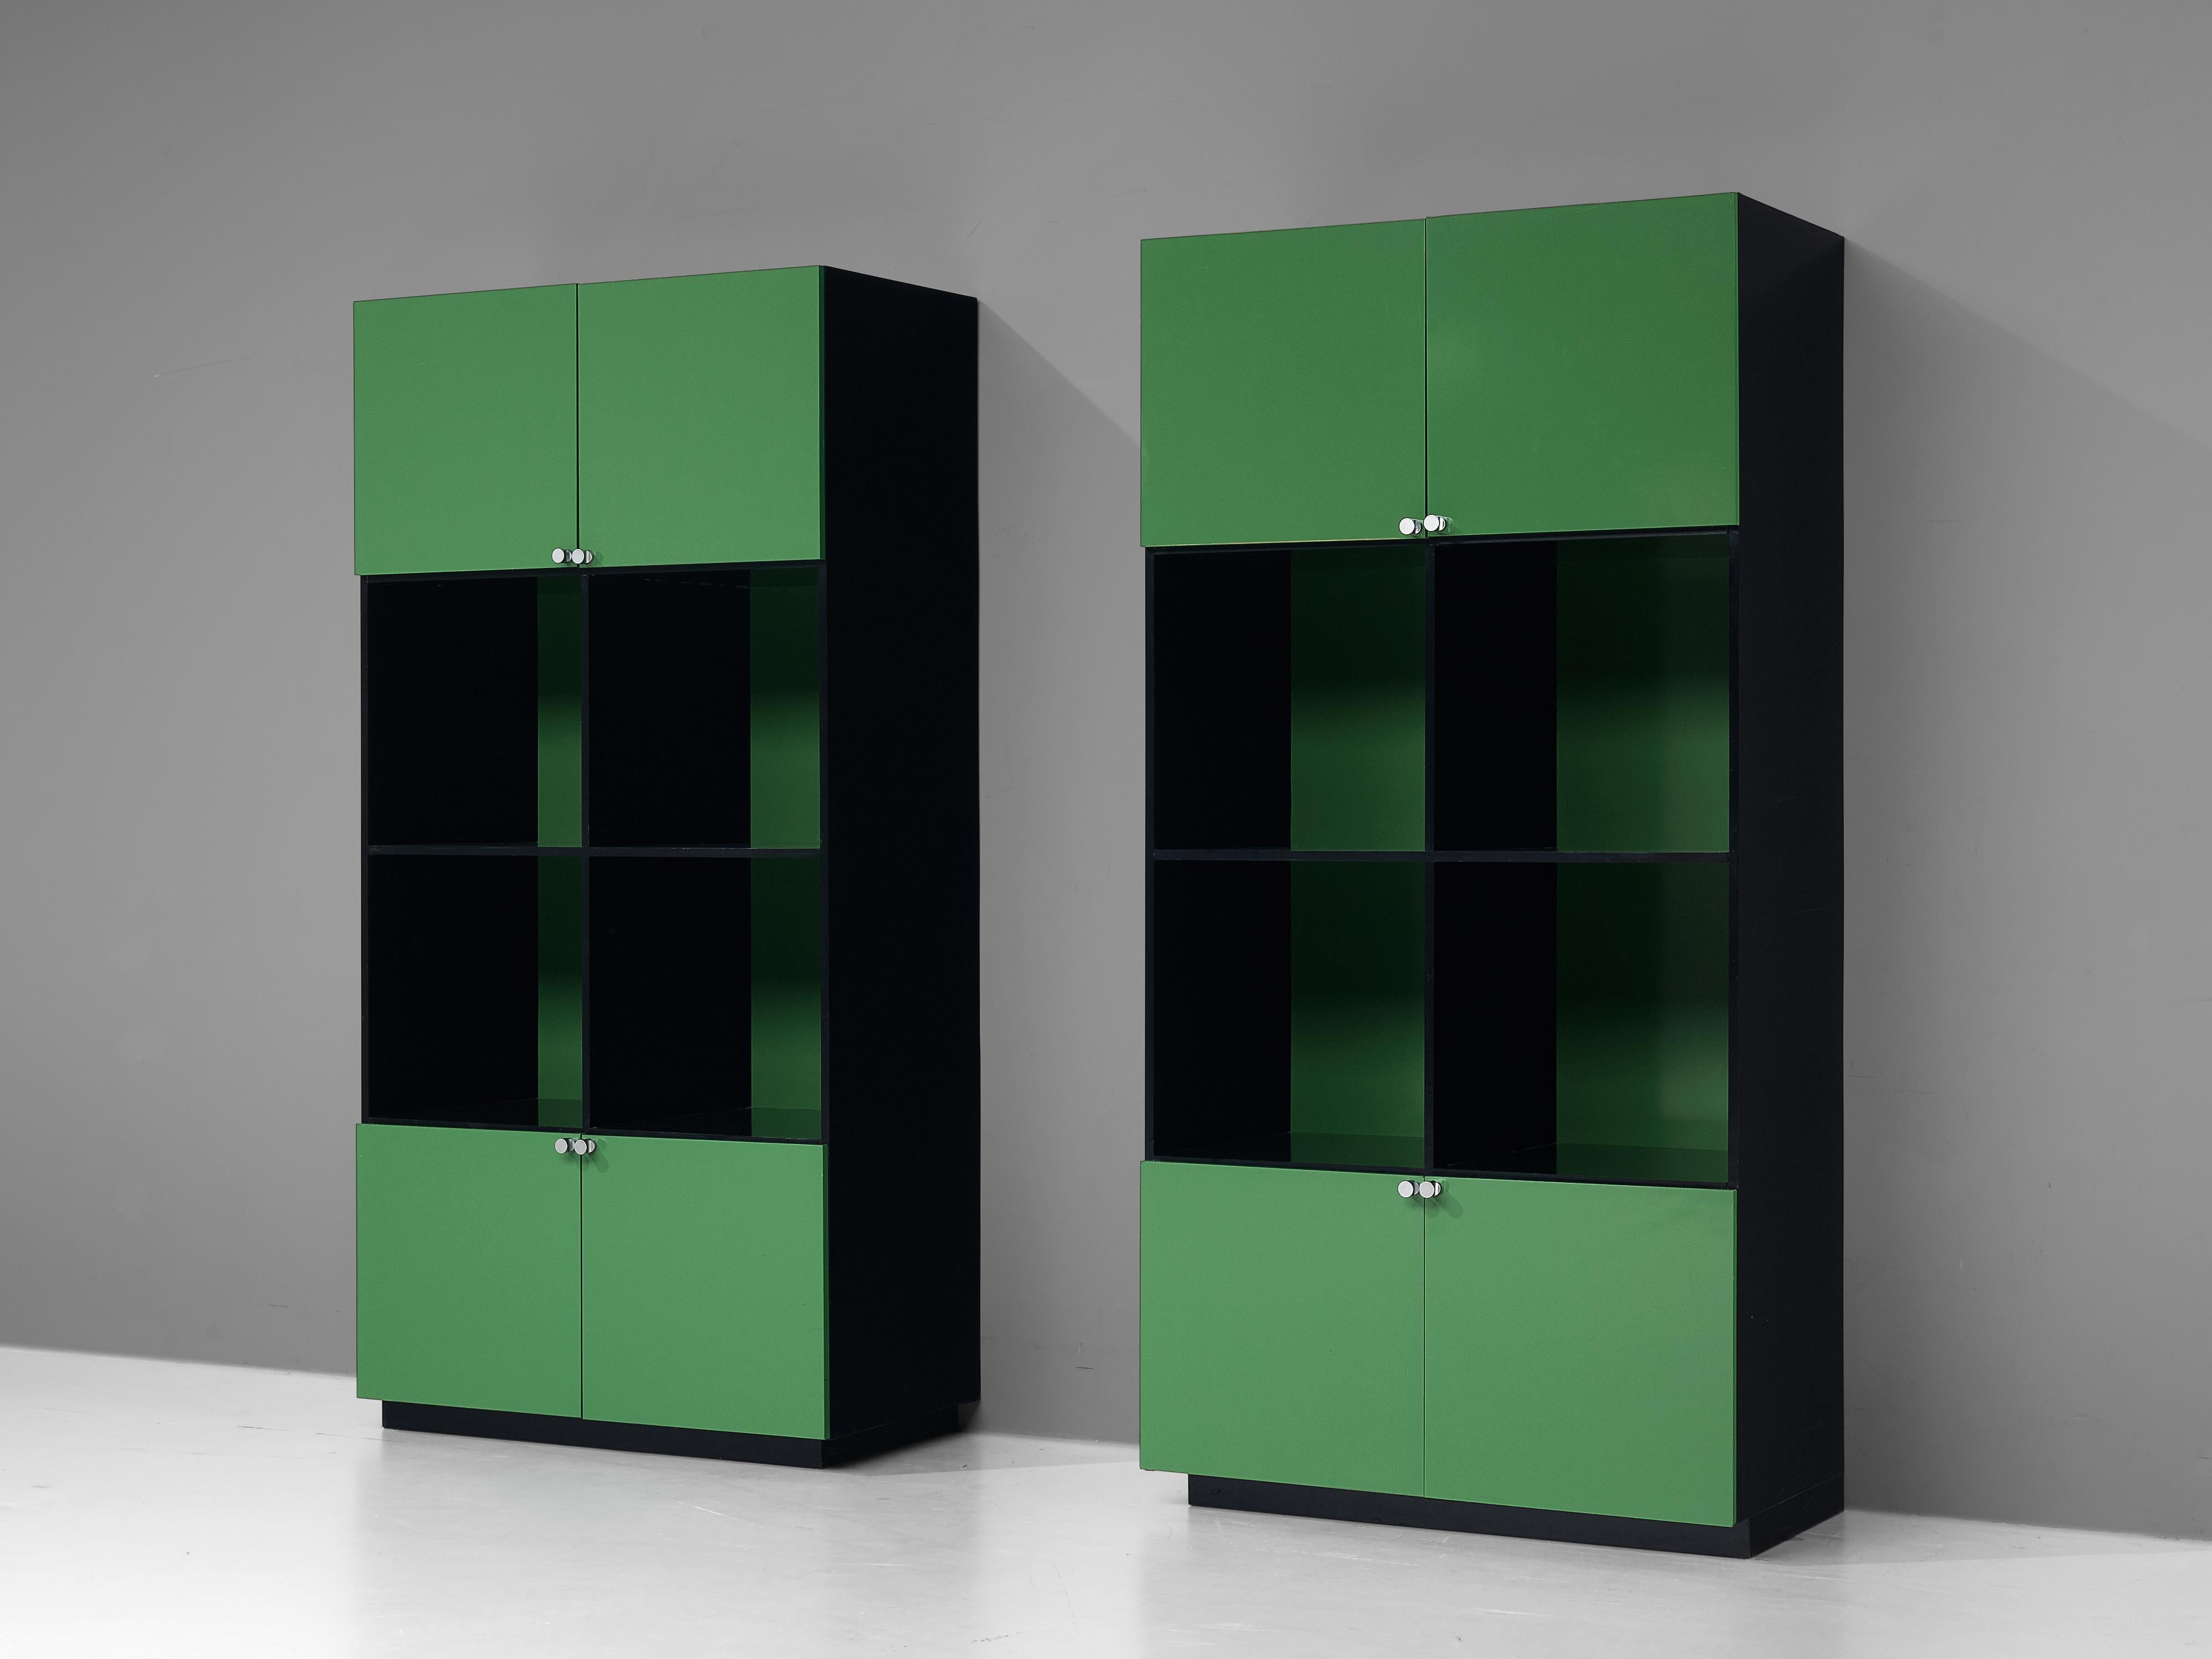 Luigi Saccardo, 'Topline' highboards, laminated wood, metal, Italy, circa 1976. 

Pair of bookcases as part of the ´Topline´ series, designed by the Italian designer Luigi Saccardo. Due to its size, these items offer a variety of different storage